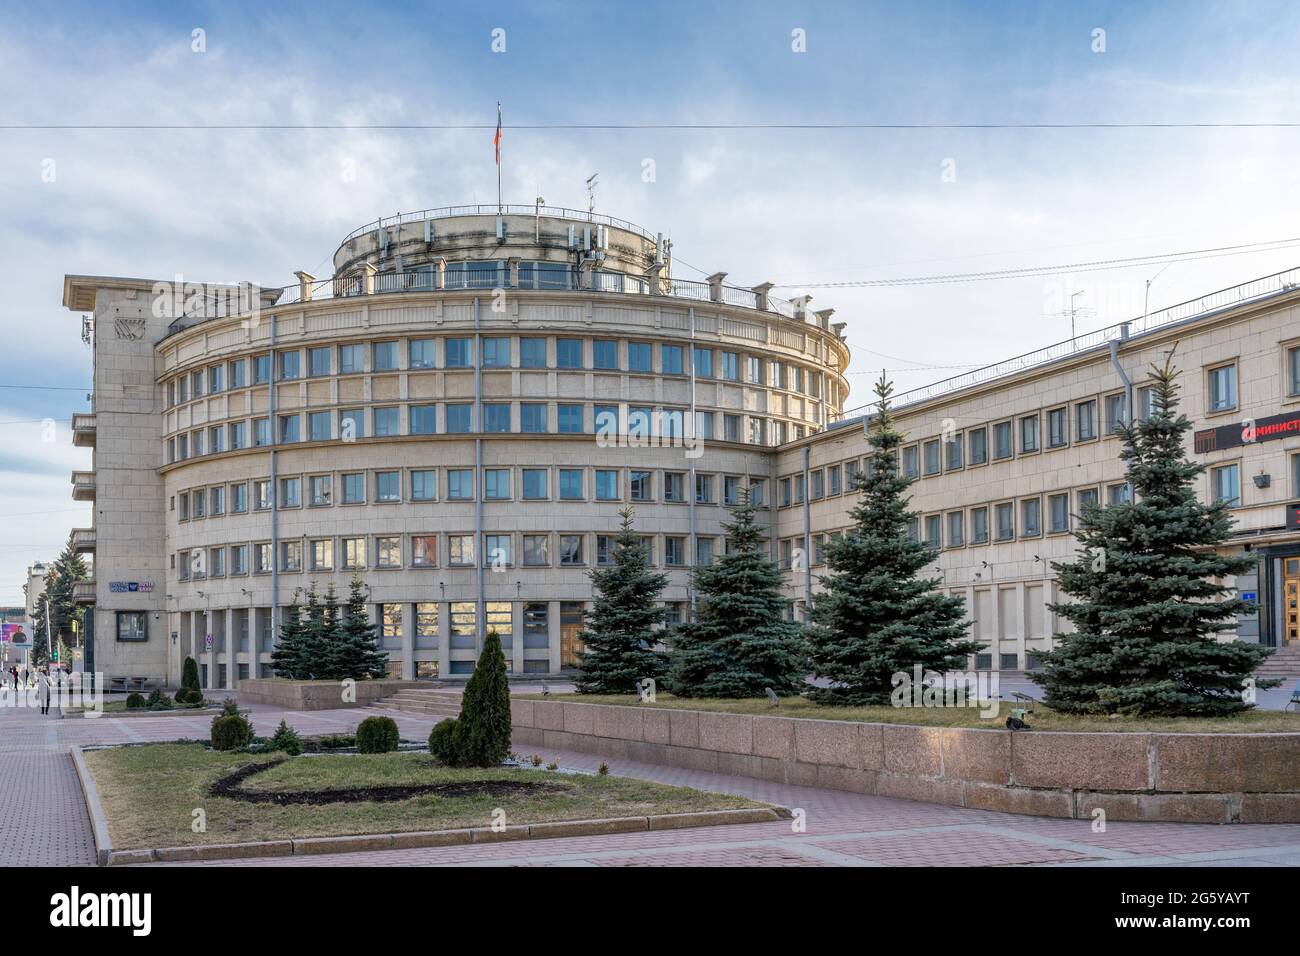 Moscow District Council building, designed by architect I. Fomin in constructivist style, 1931-1935, Moskovskiy pr, St Petersburg, Russia Stock Photo